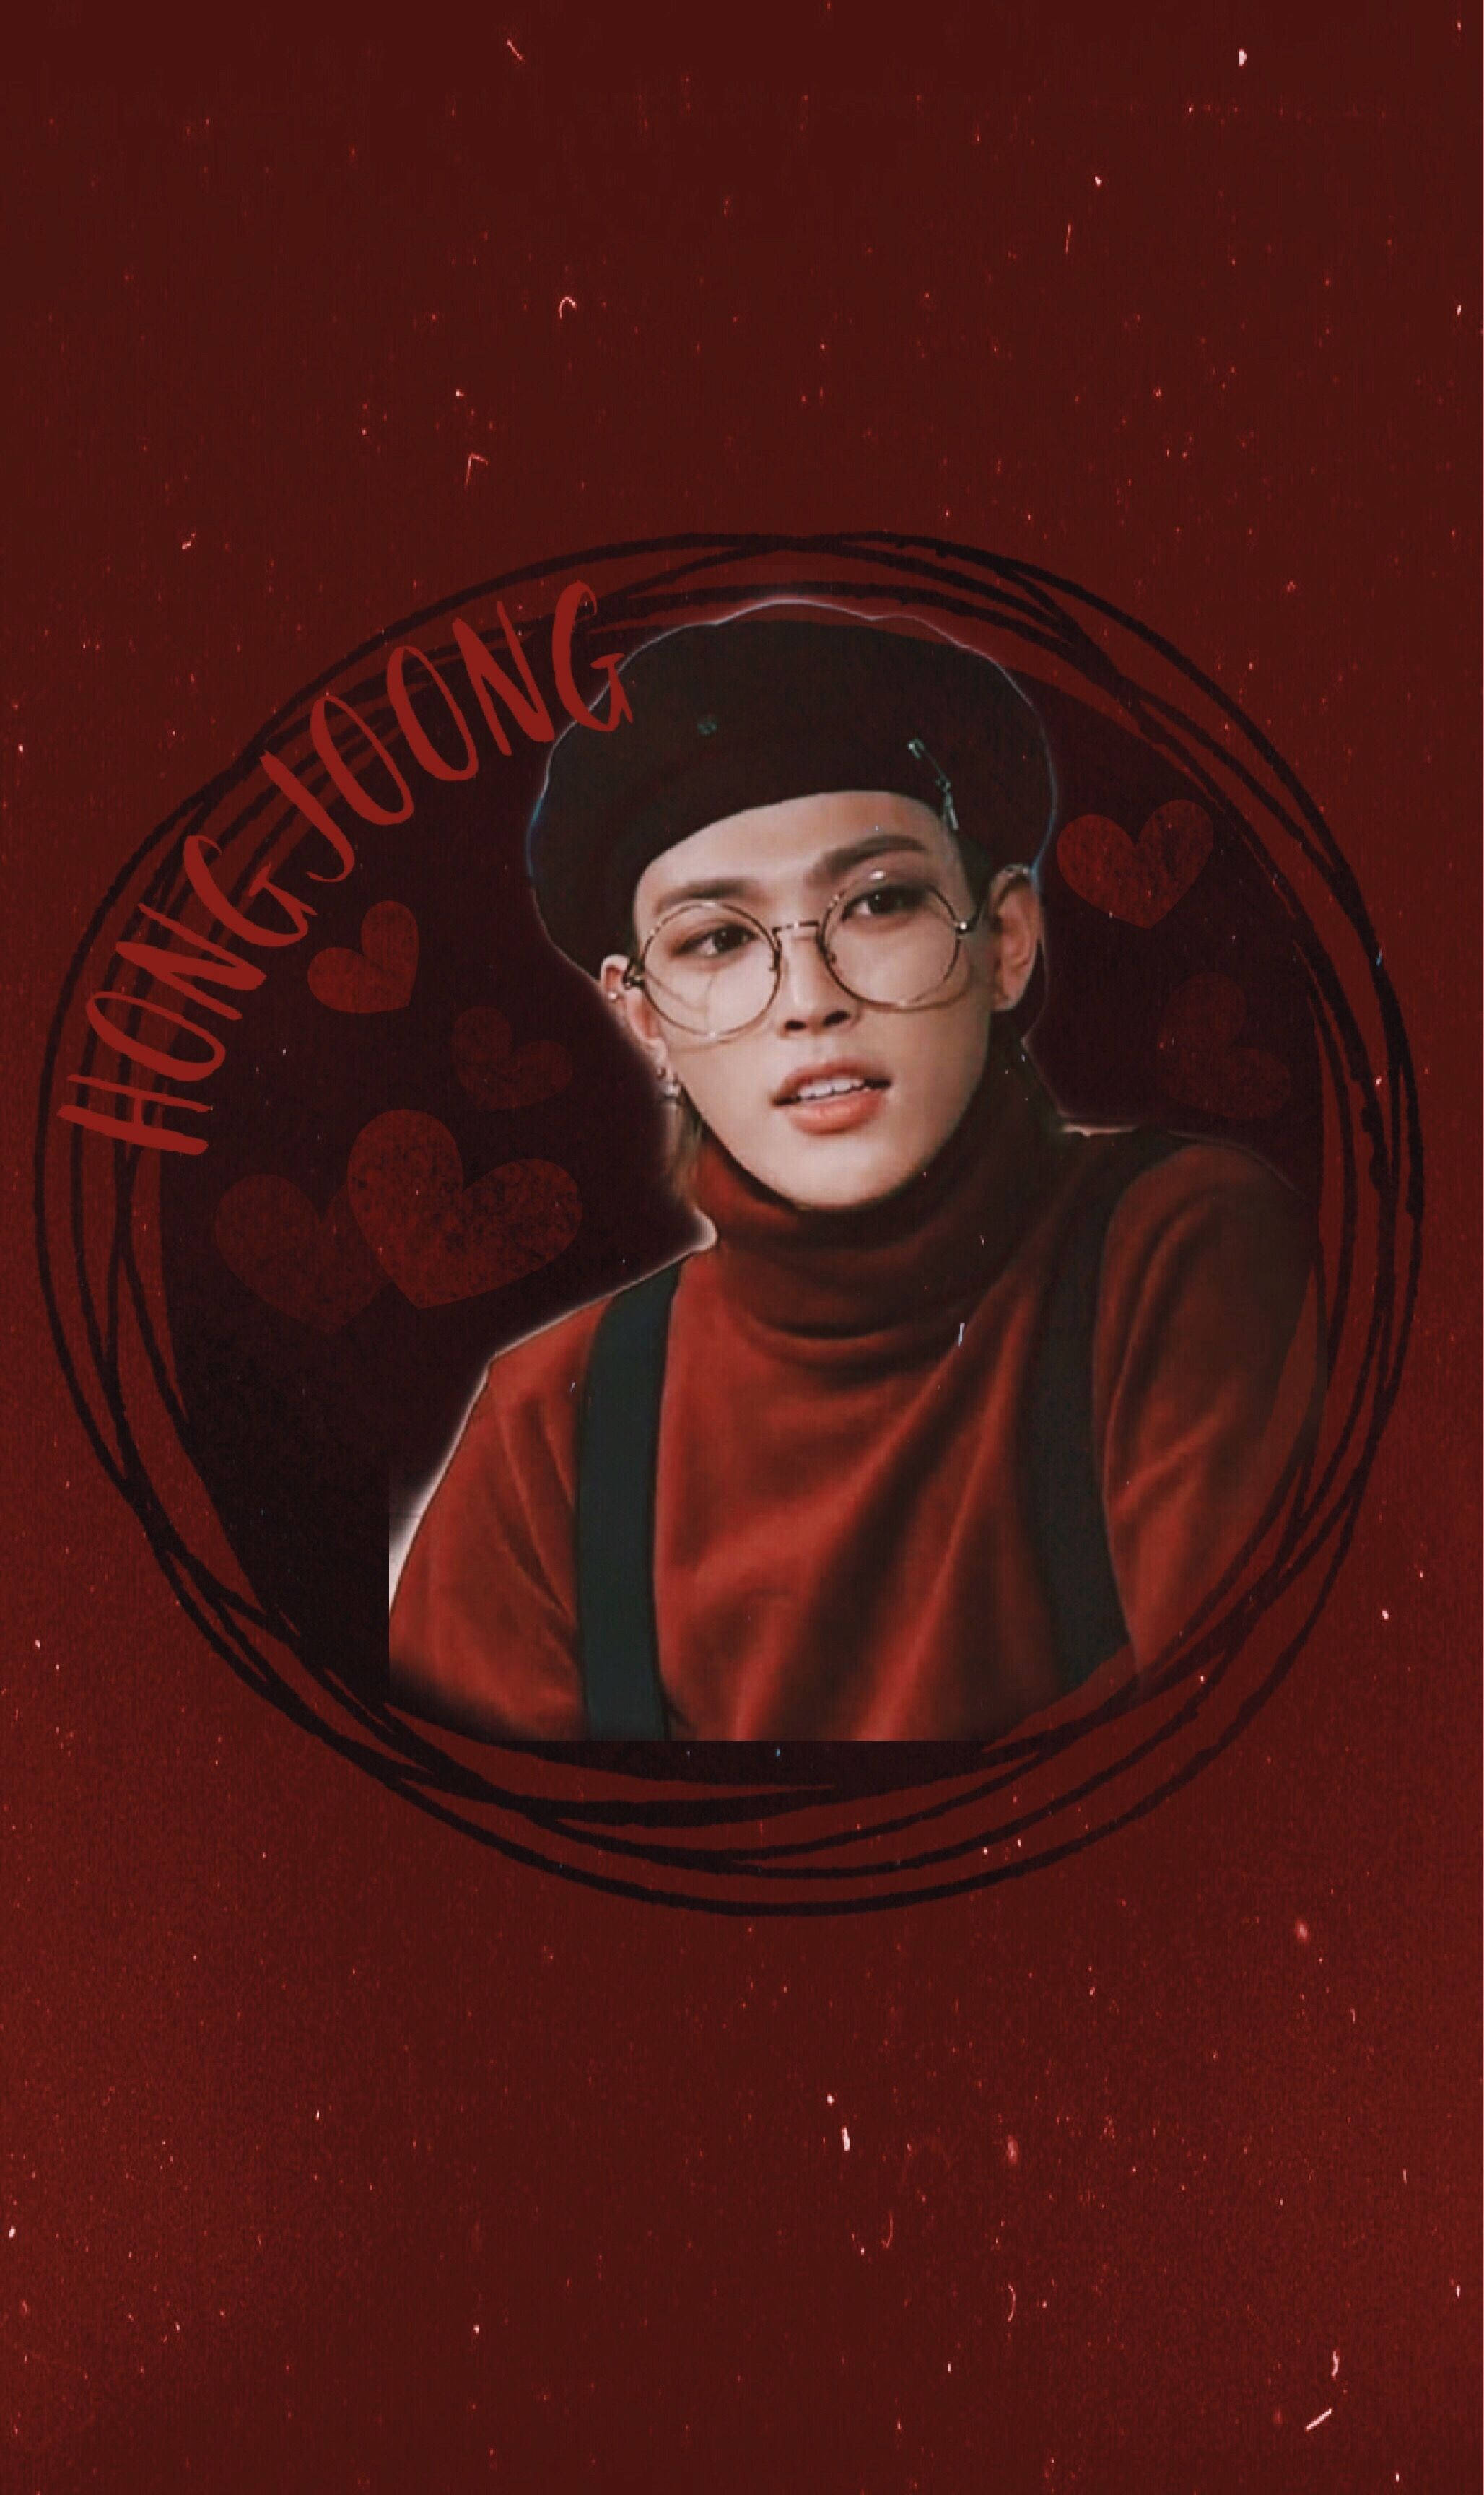 Good-looking Aesthetic Profile Picture Of South Korean Pop Music Artist Hong Joong With Heart Drawing Design On A Red Background